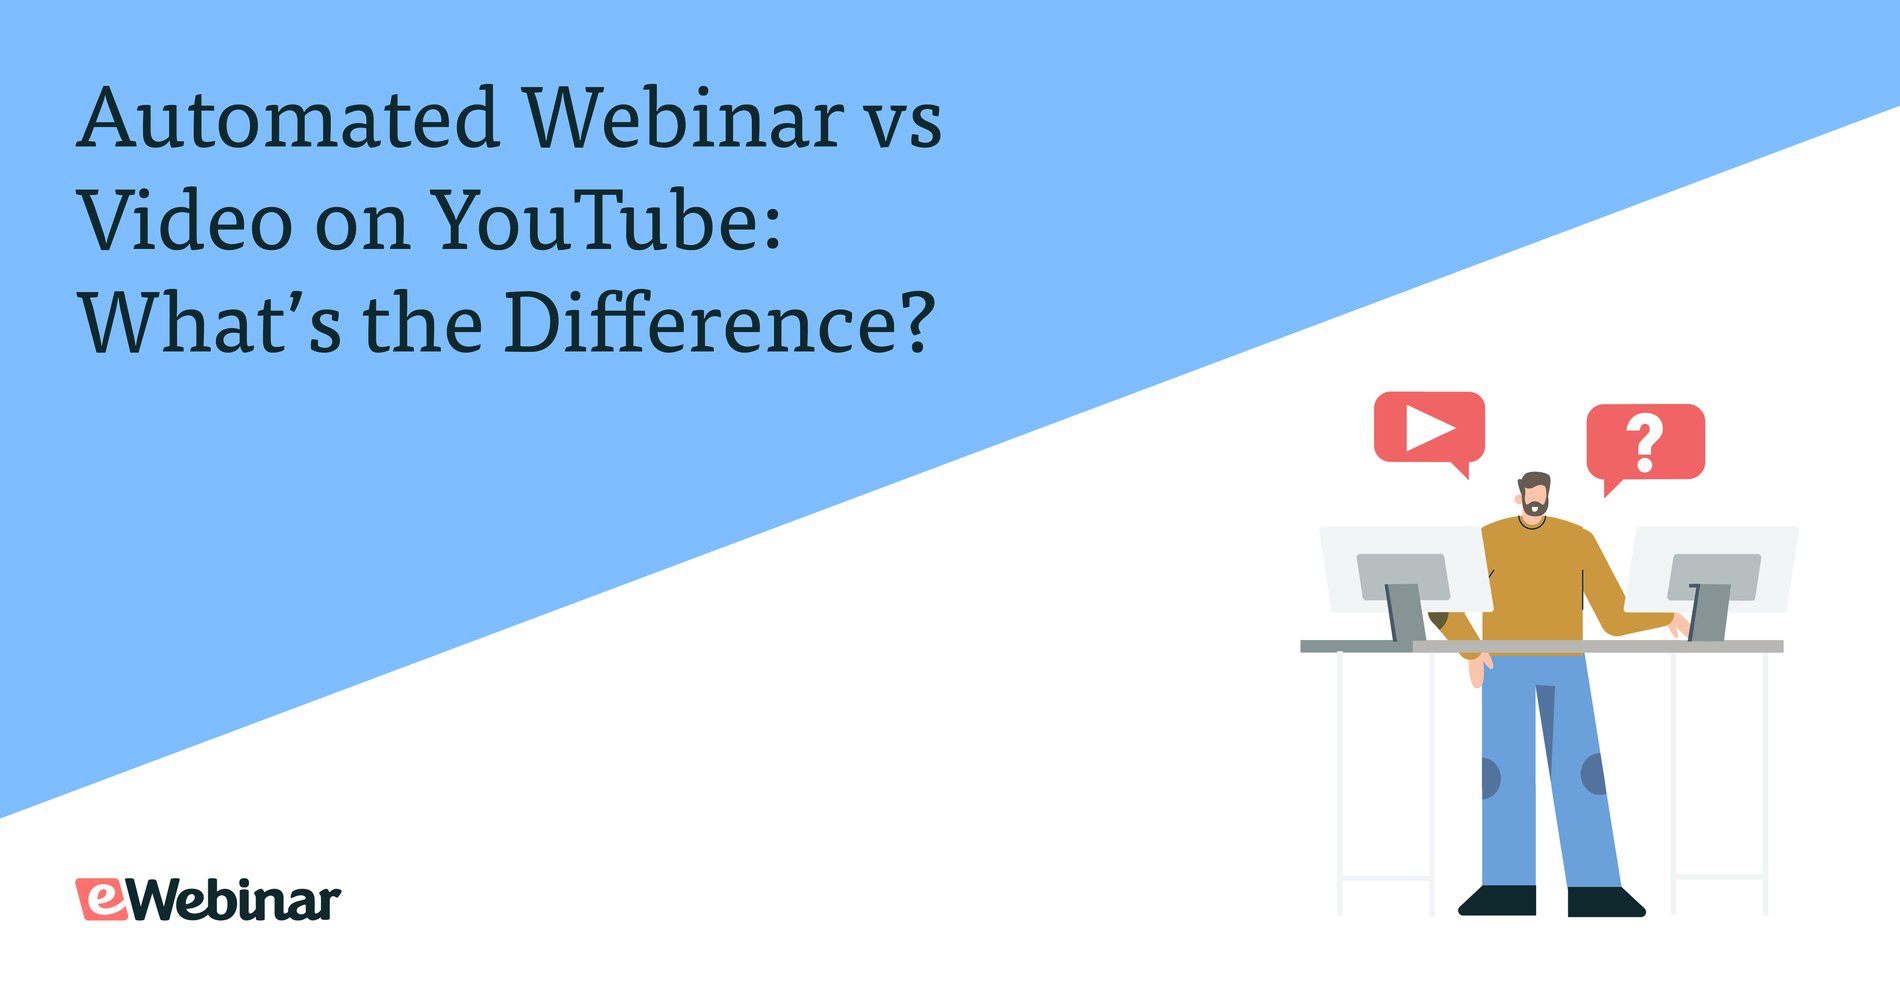 Automated Webinar vs Video on YouTube: What’s the Difference?